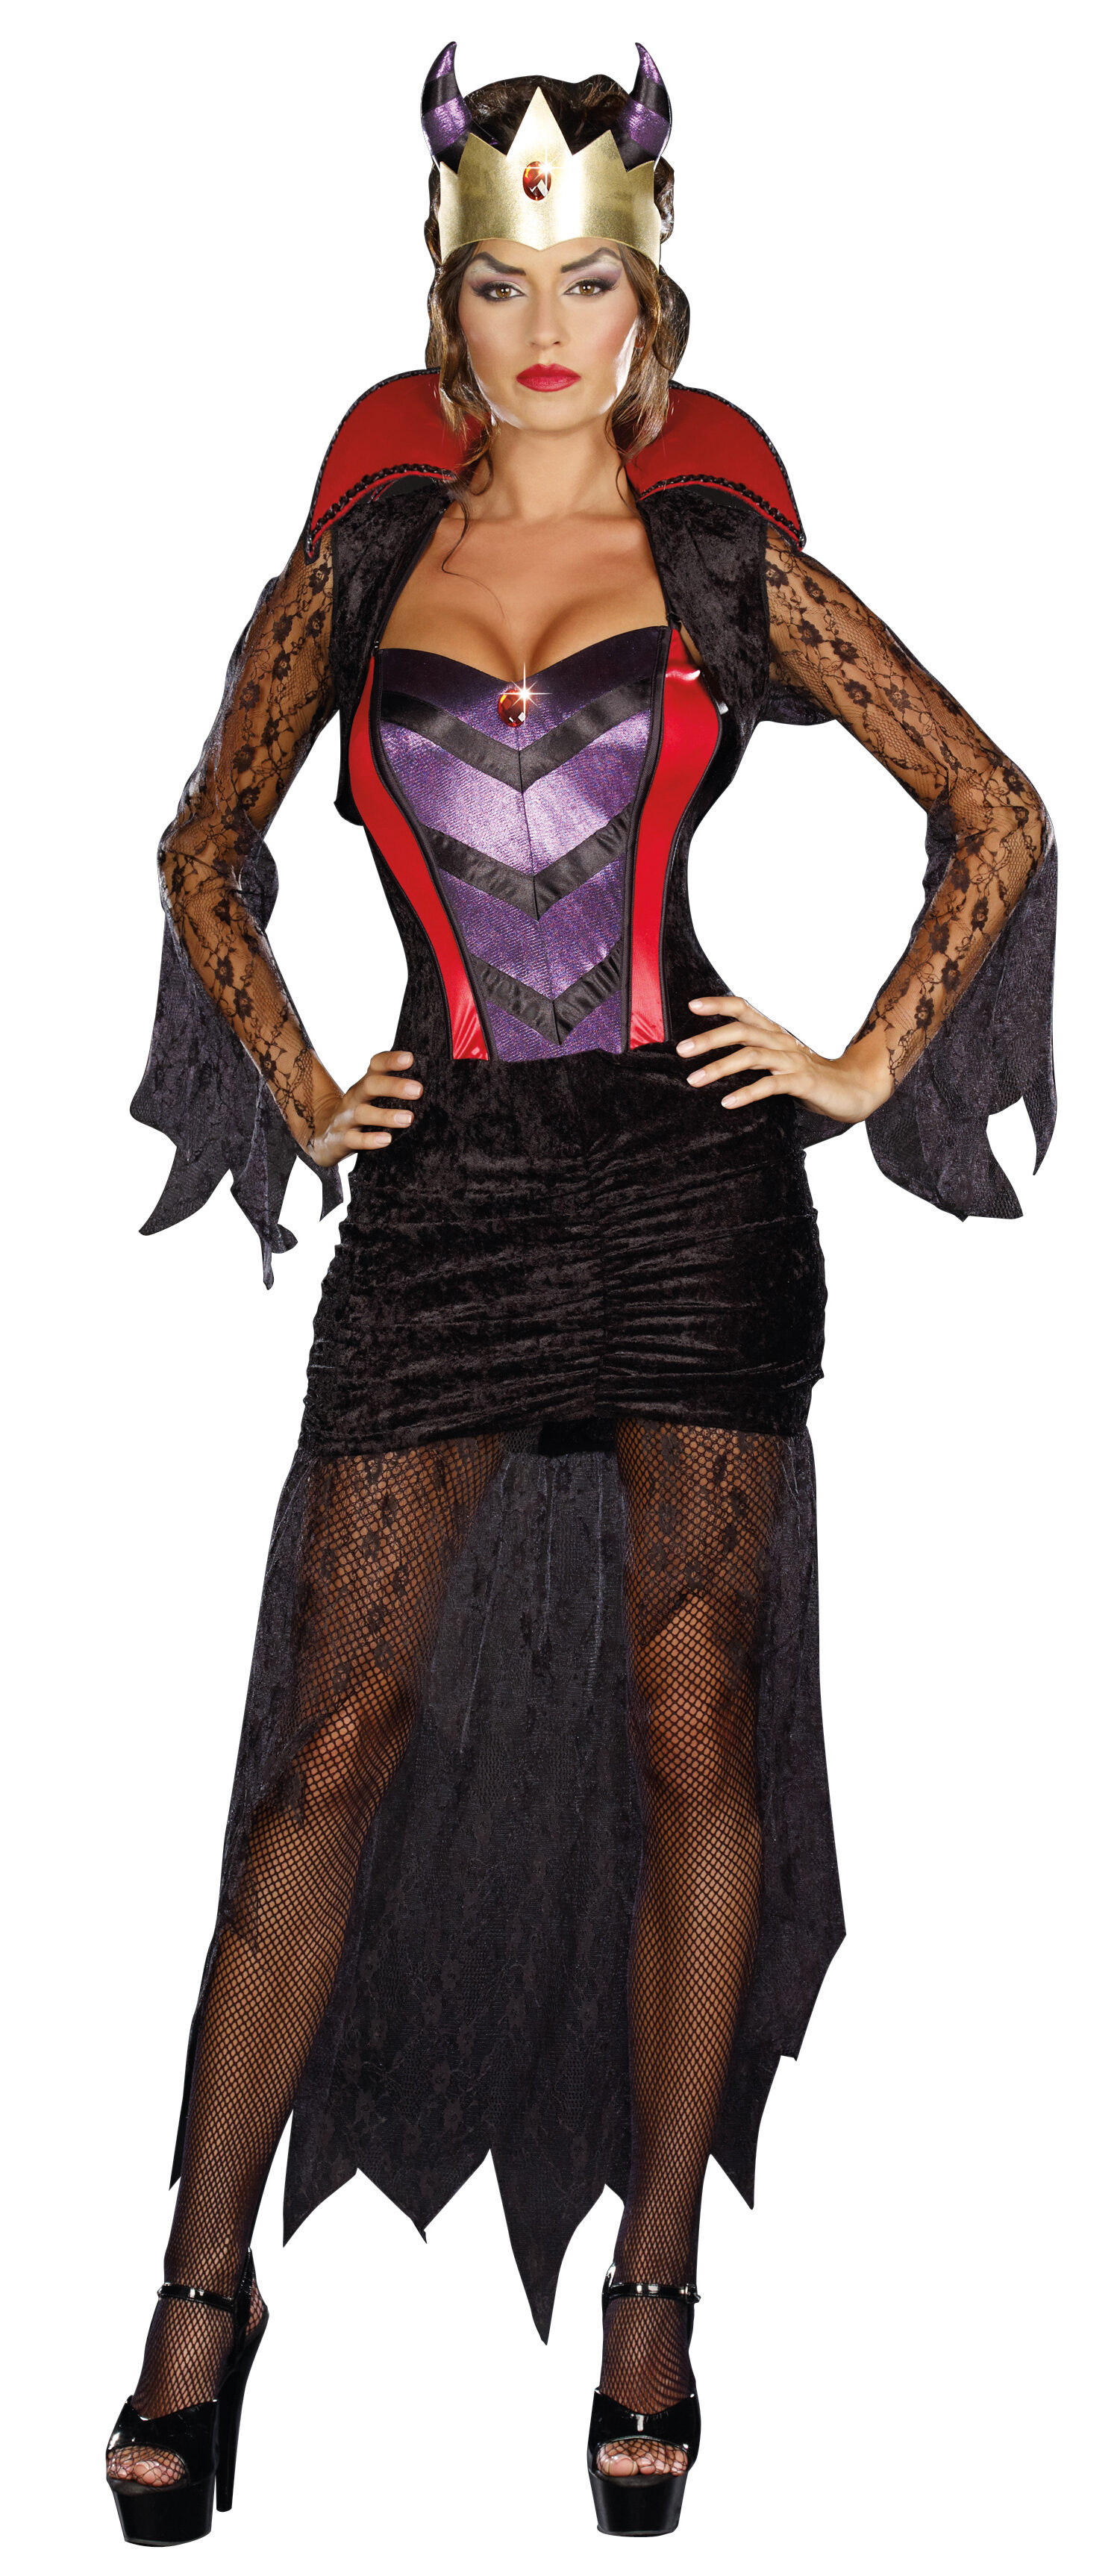 Sexy Wicked Queen Villain Costume - Mr. Costumes.